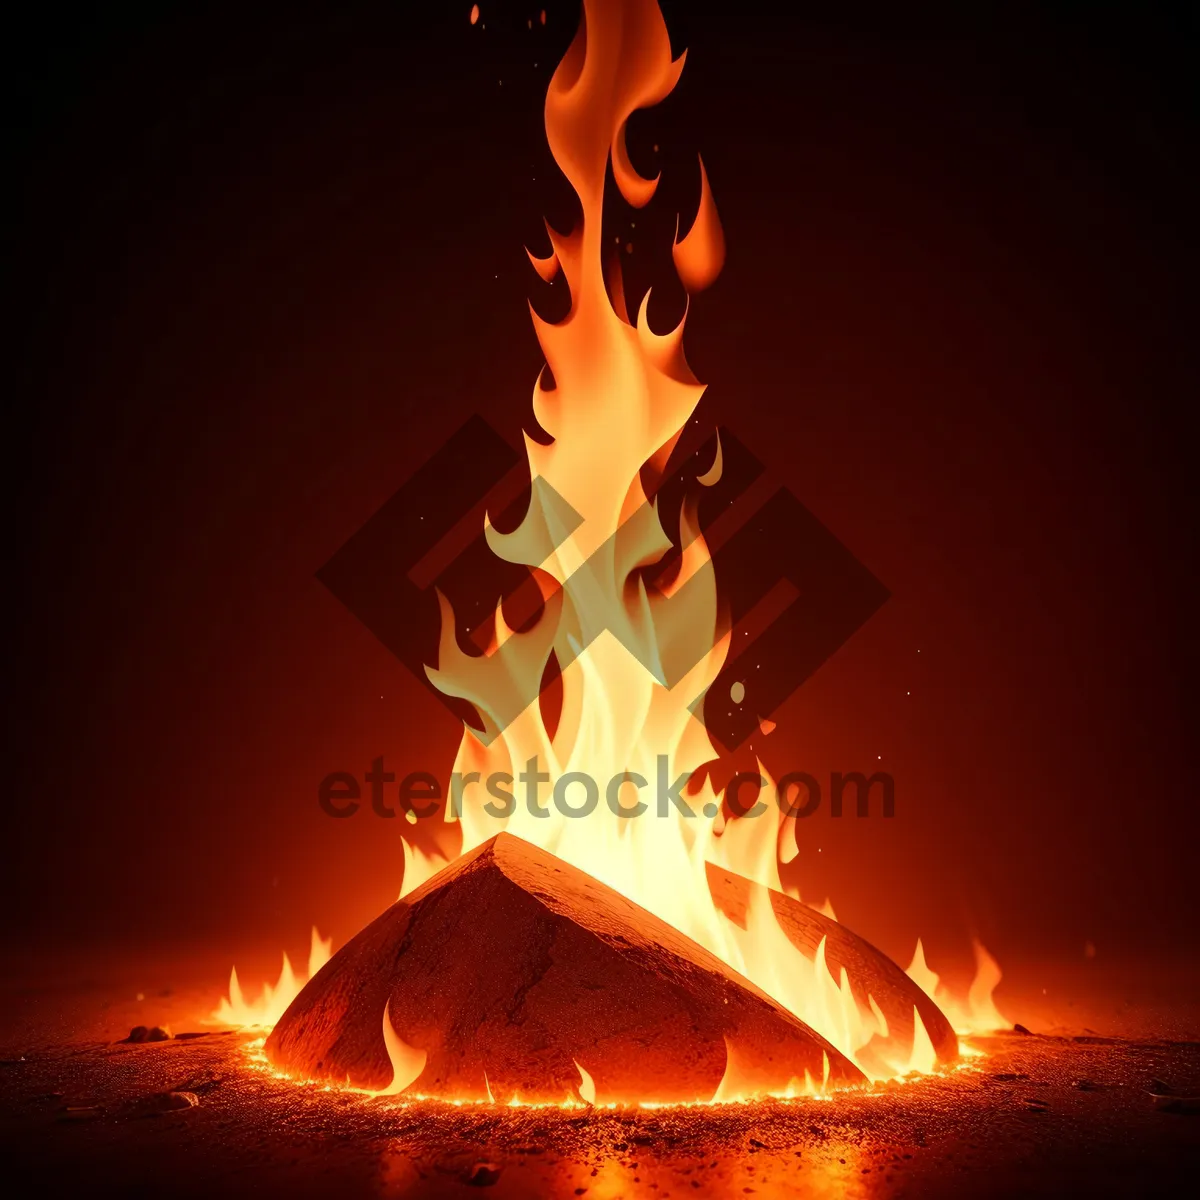 Picture of Fiery Inferno: Captivating Blazing Flames in Black